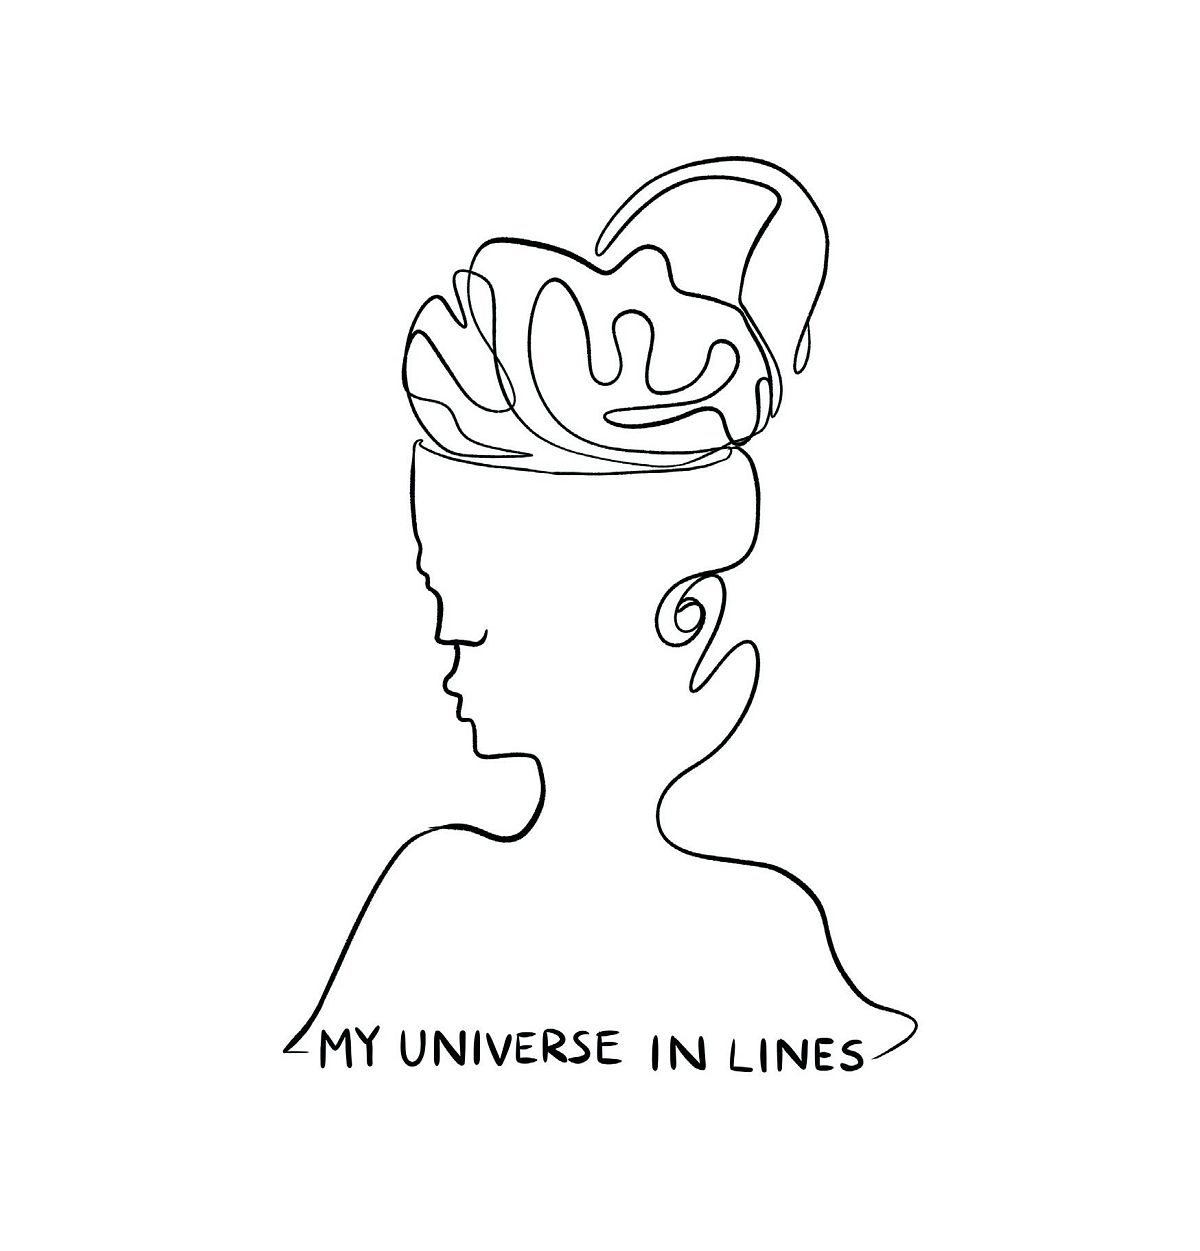 My universe in lines